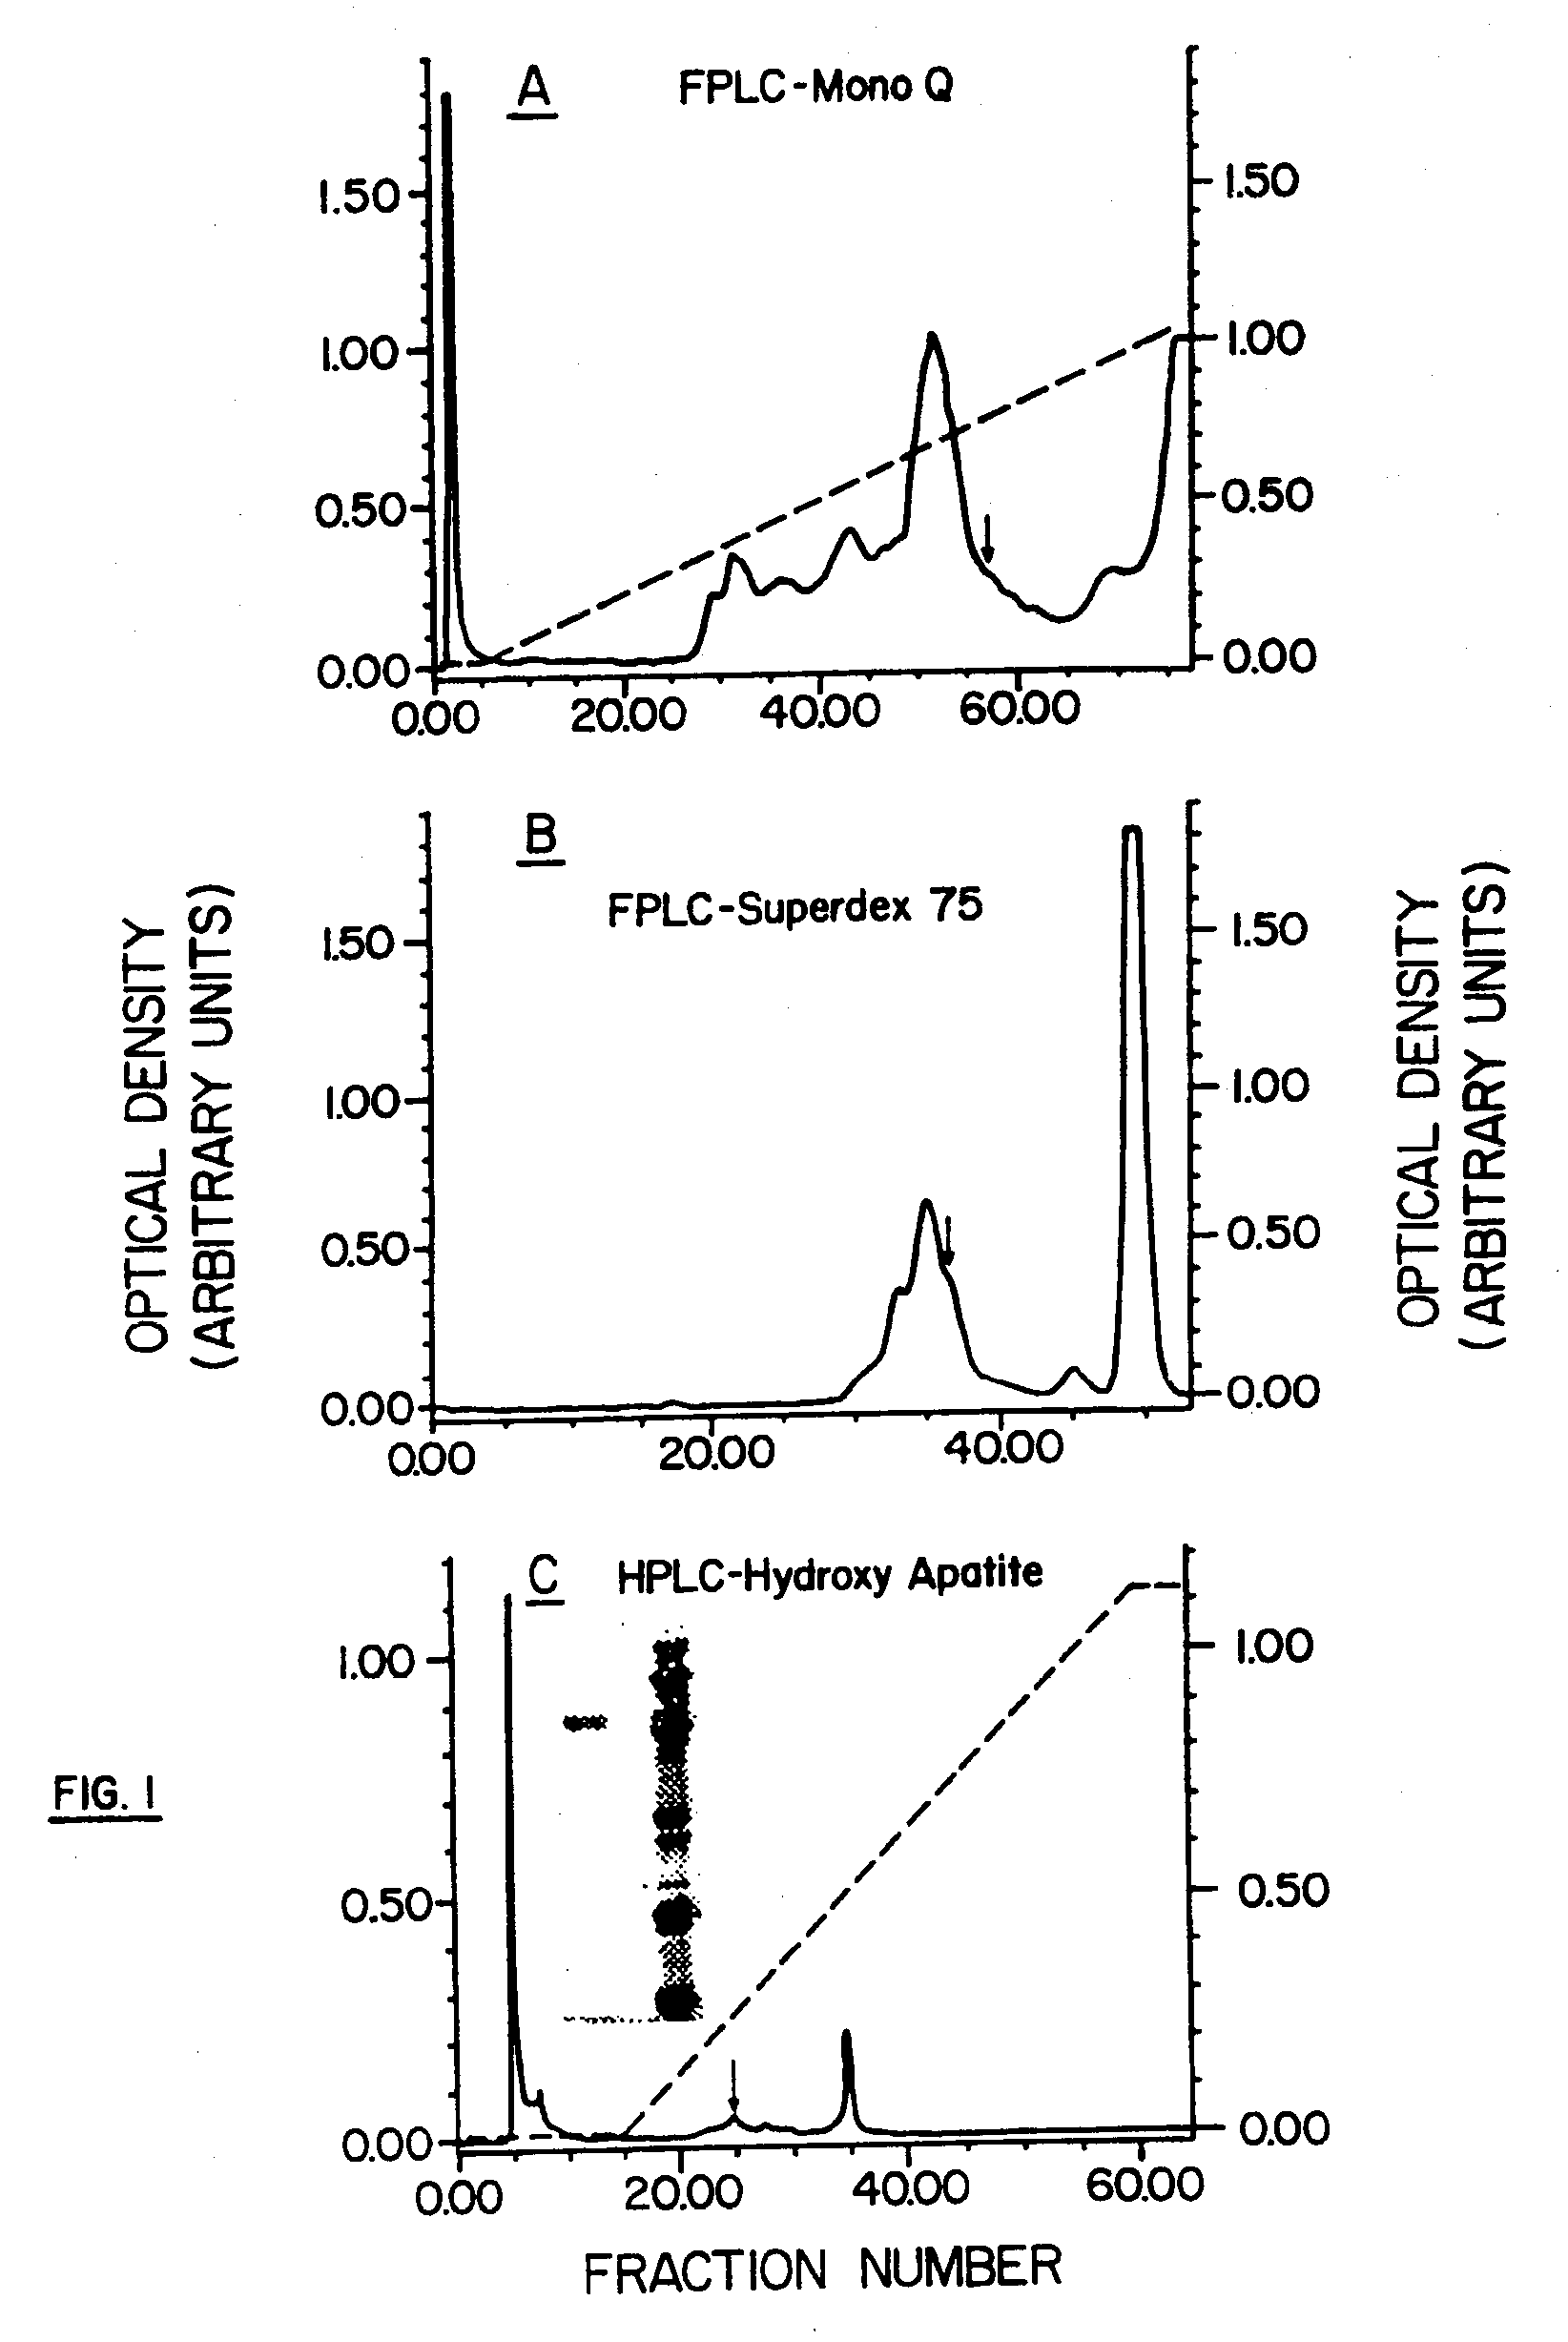 B Cell Activation and Polypeptides Having CD14 Activity